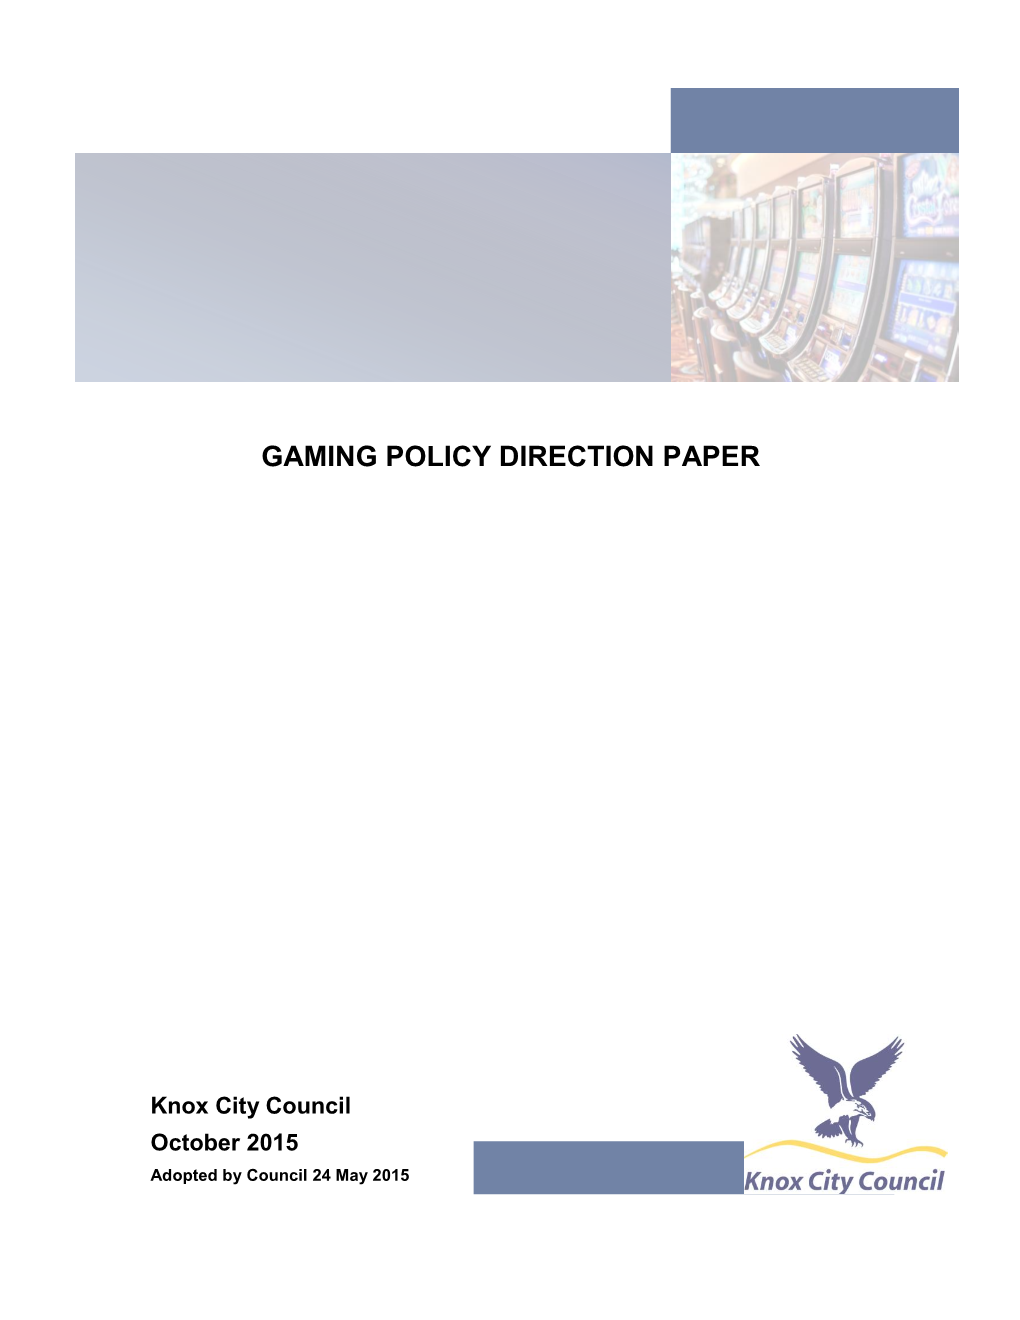 Gaming Policy Direction Paper 2015, Knox City Council, 2016